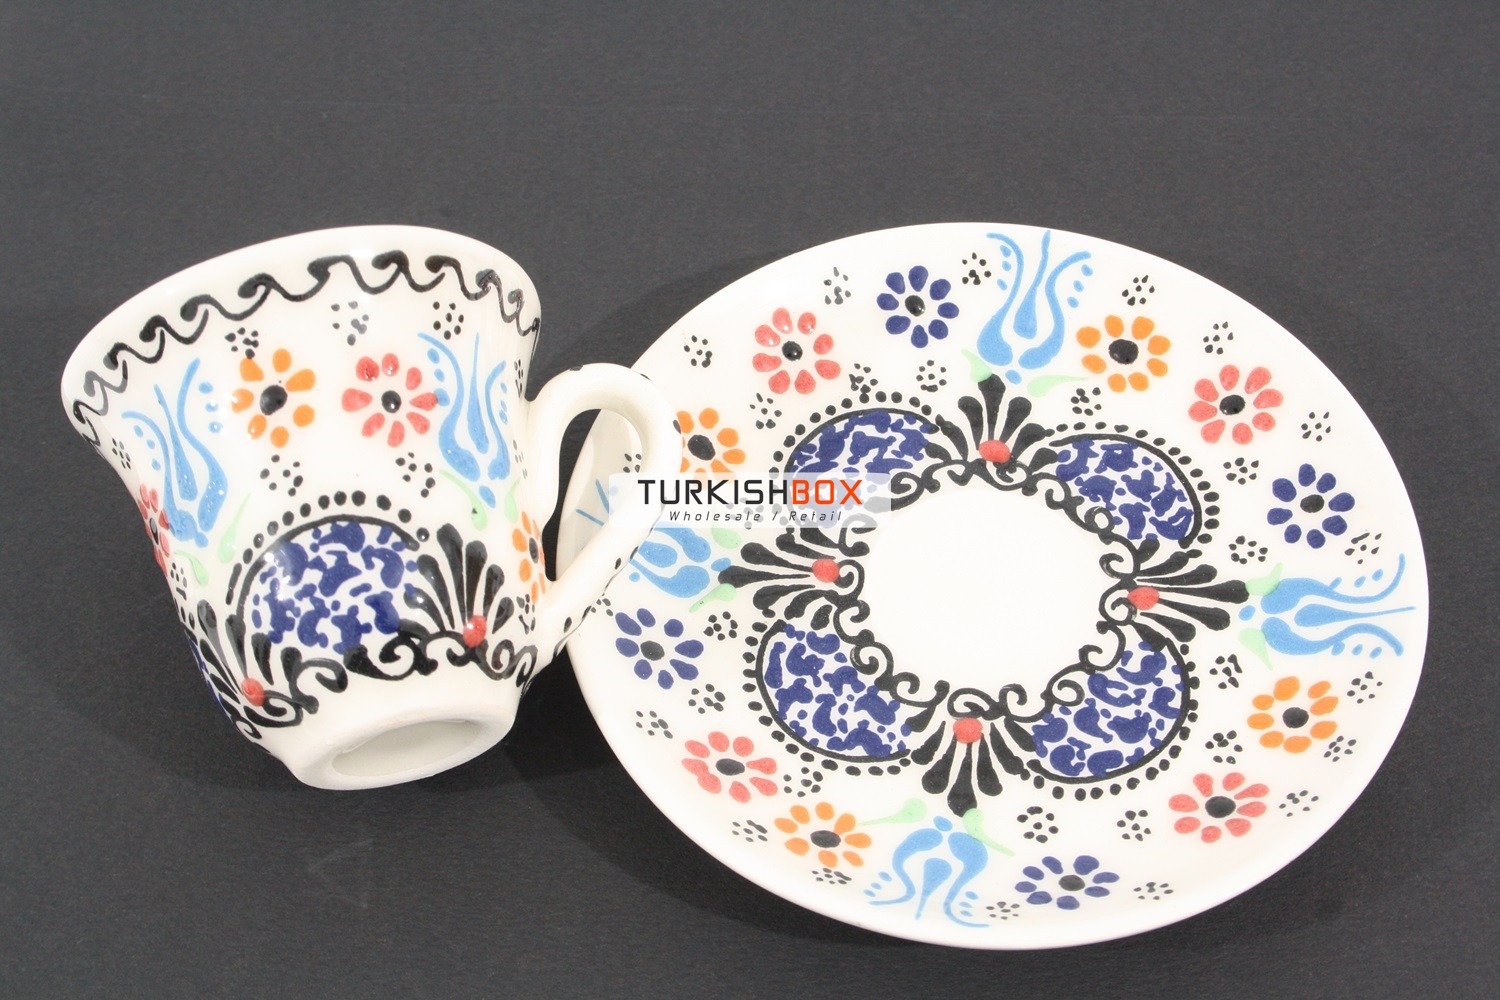 https://turkishbox.com/wholesale/wp-content/uploads/sites/2/2021/06/Ceramic-Turkish-Coffee-Cup-and-Saucer-White.jpg